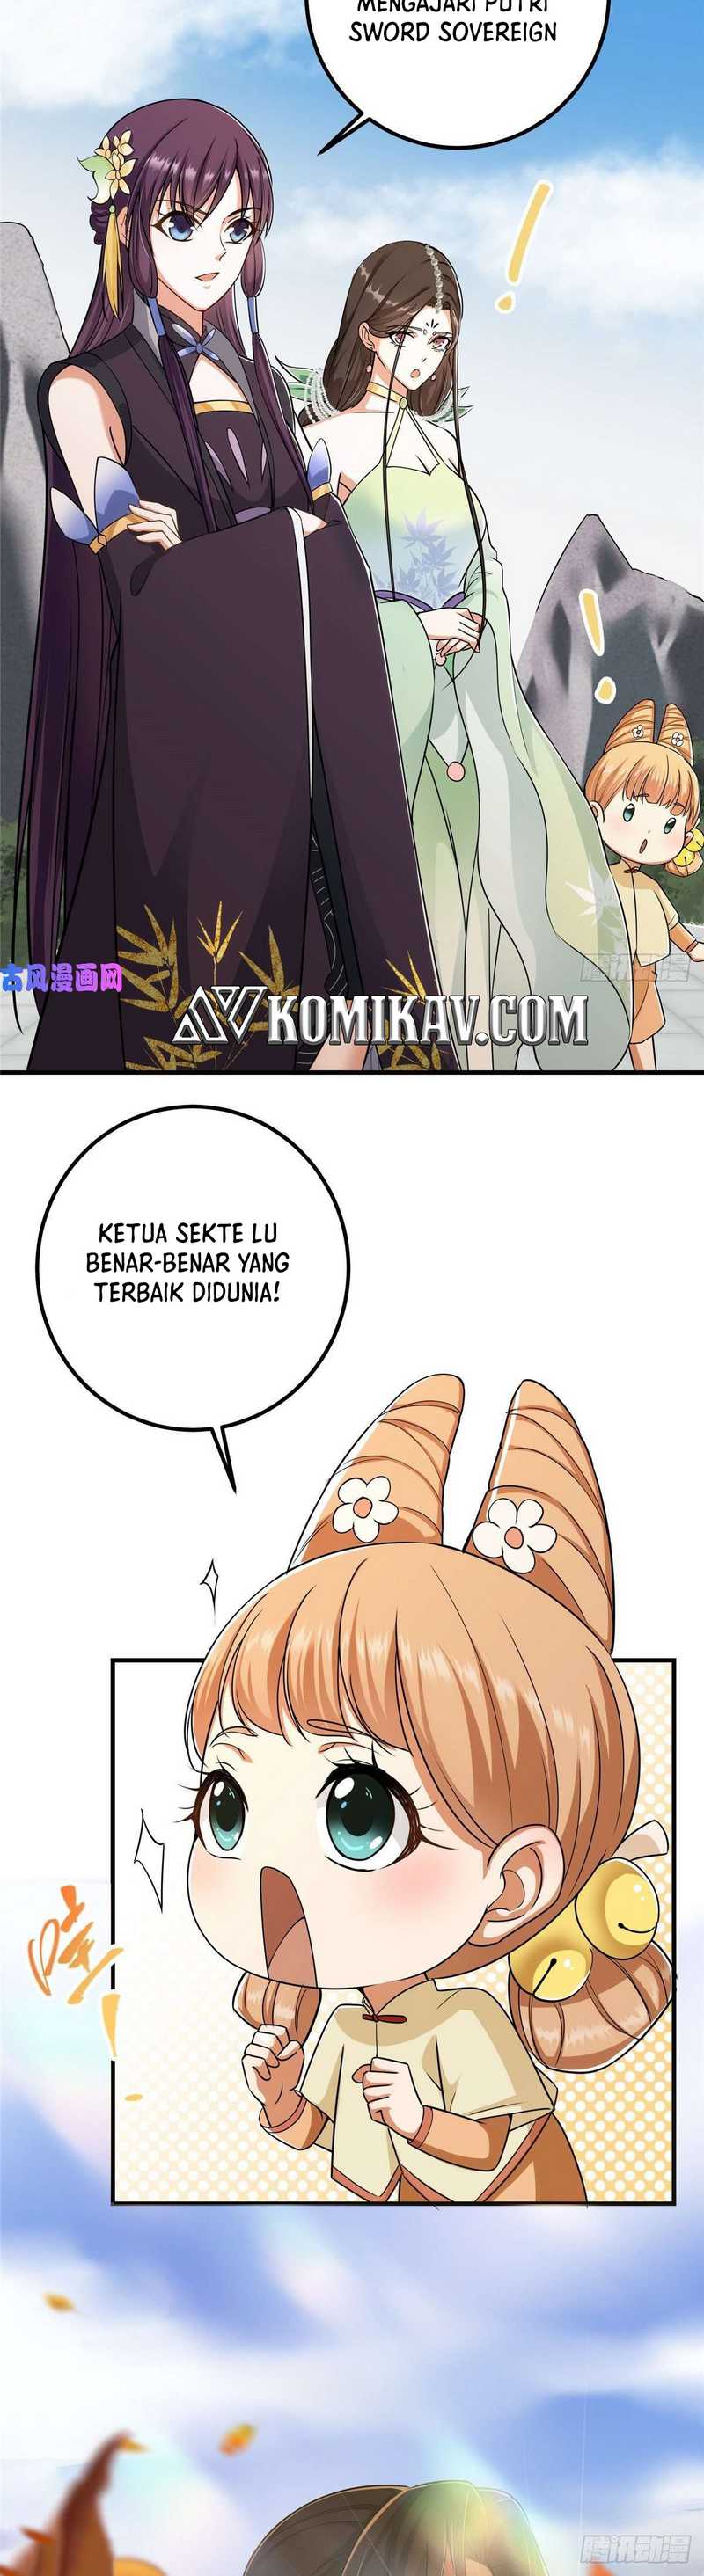 Keep A Low Profile, Sect Leader Chapter 70 Bahasa Indonesia